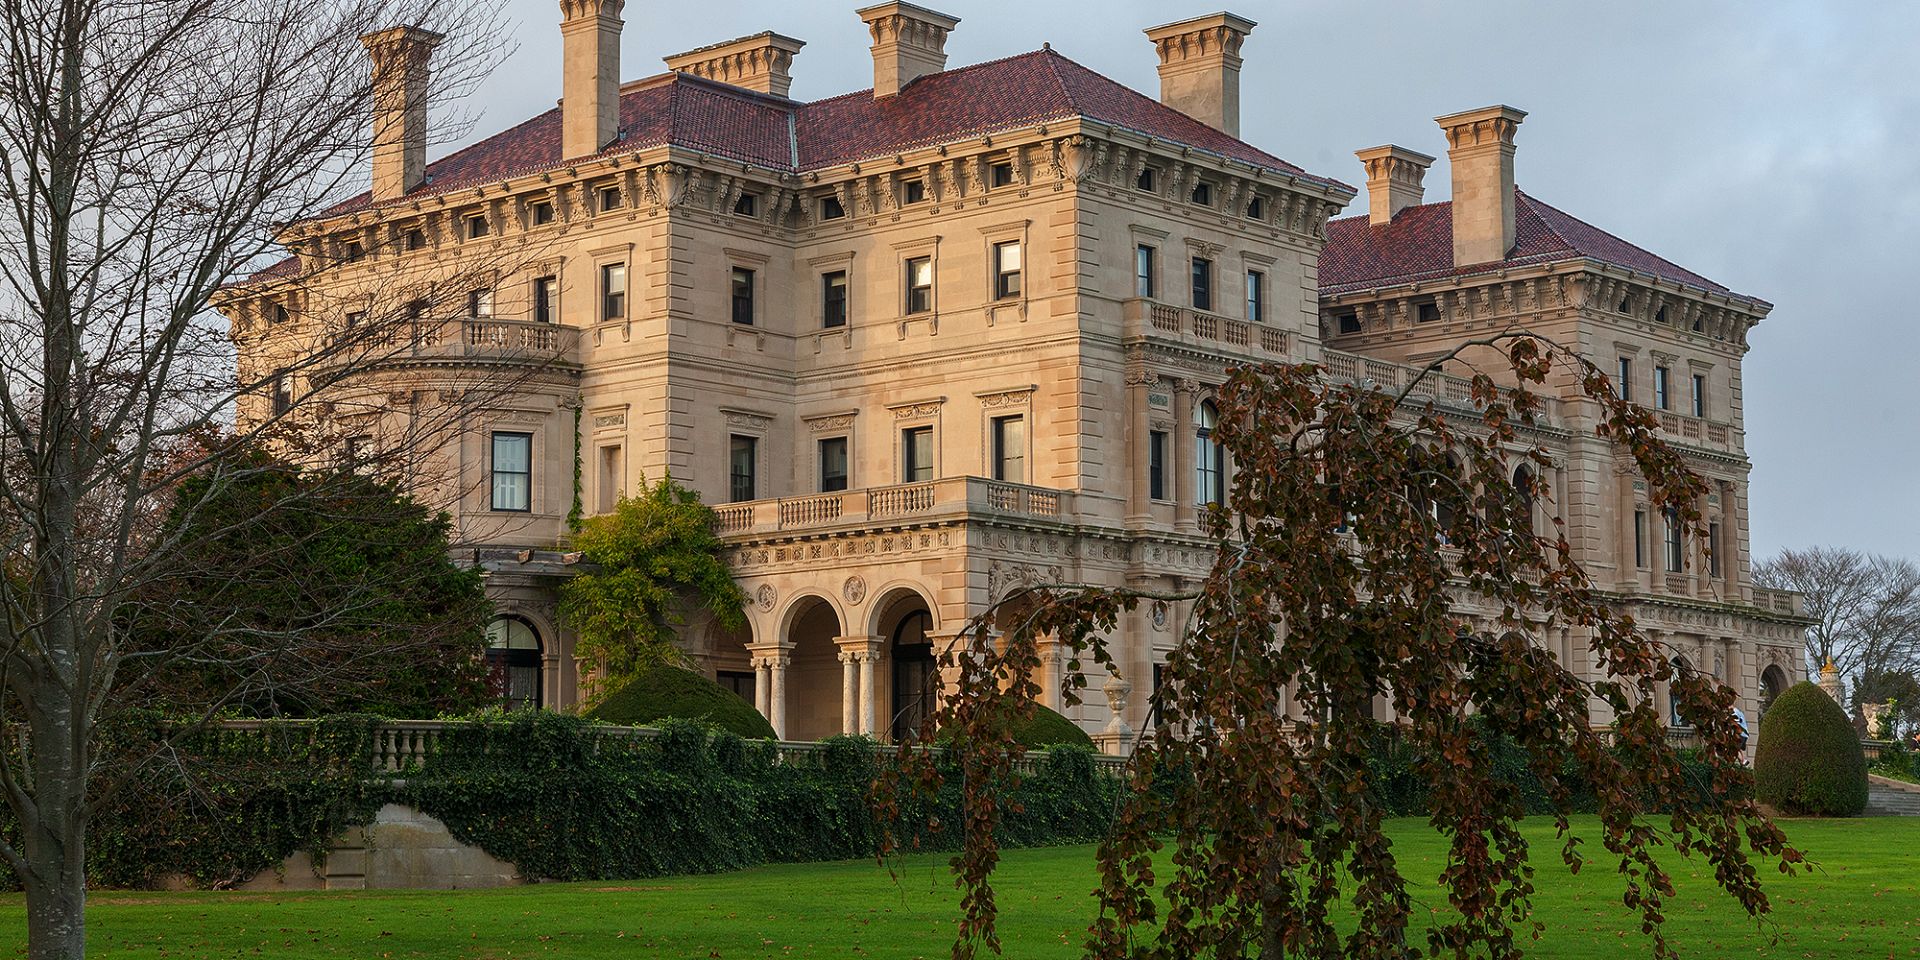 The Breakers Mansion is one of Newport's historic mansions, located a short distance from The Chanler